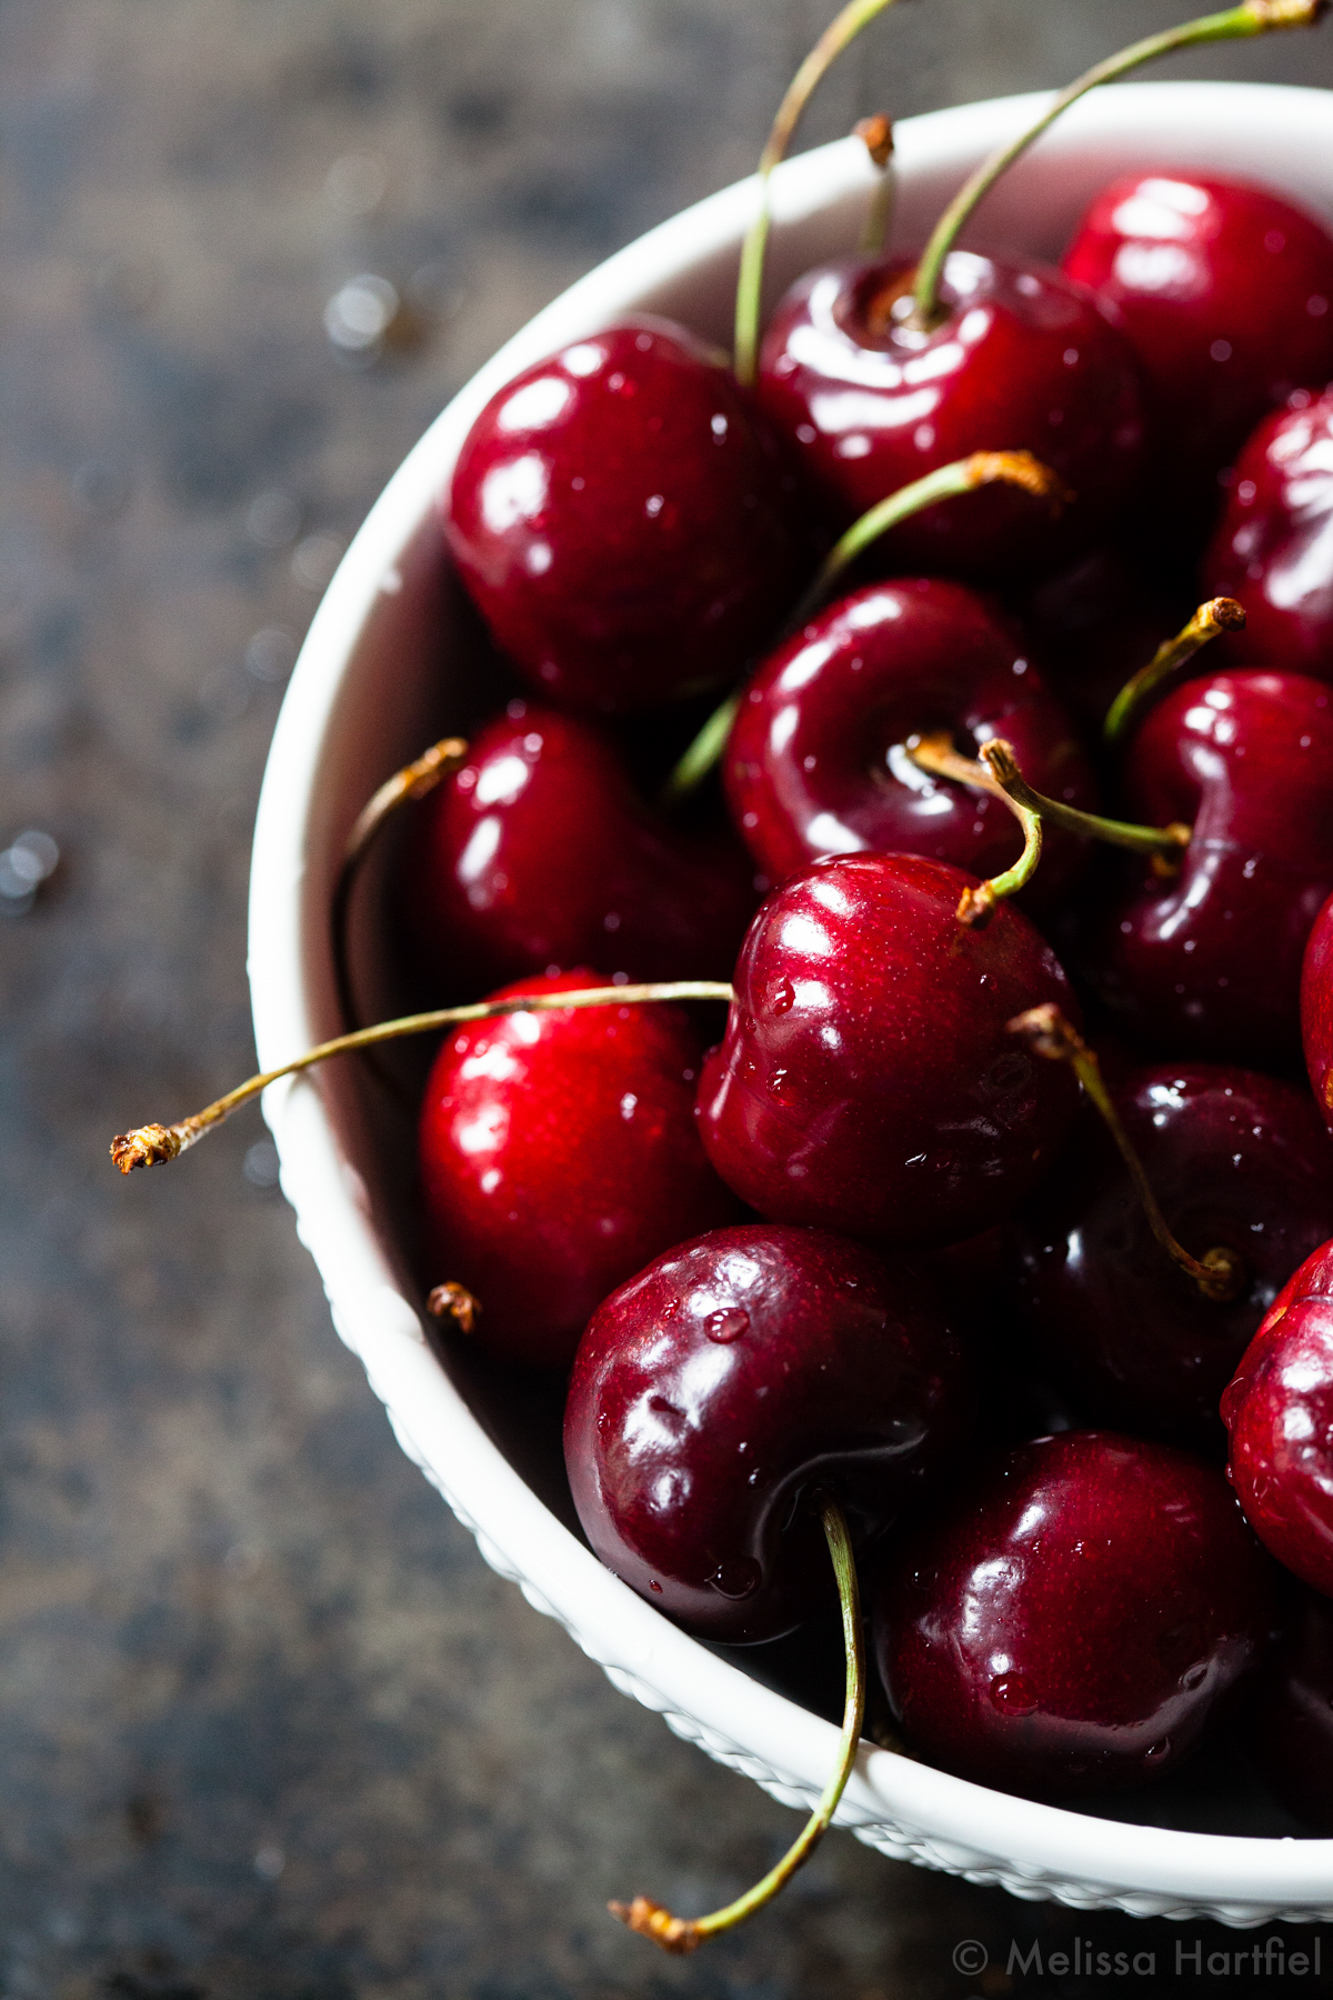 a bowl full of ripe cherries with water droplets